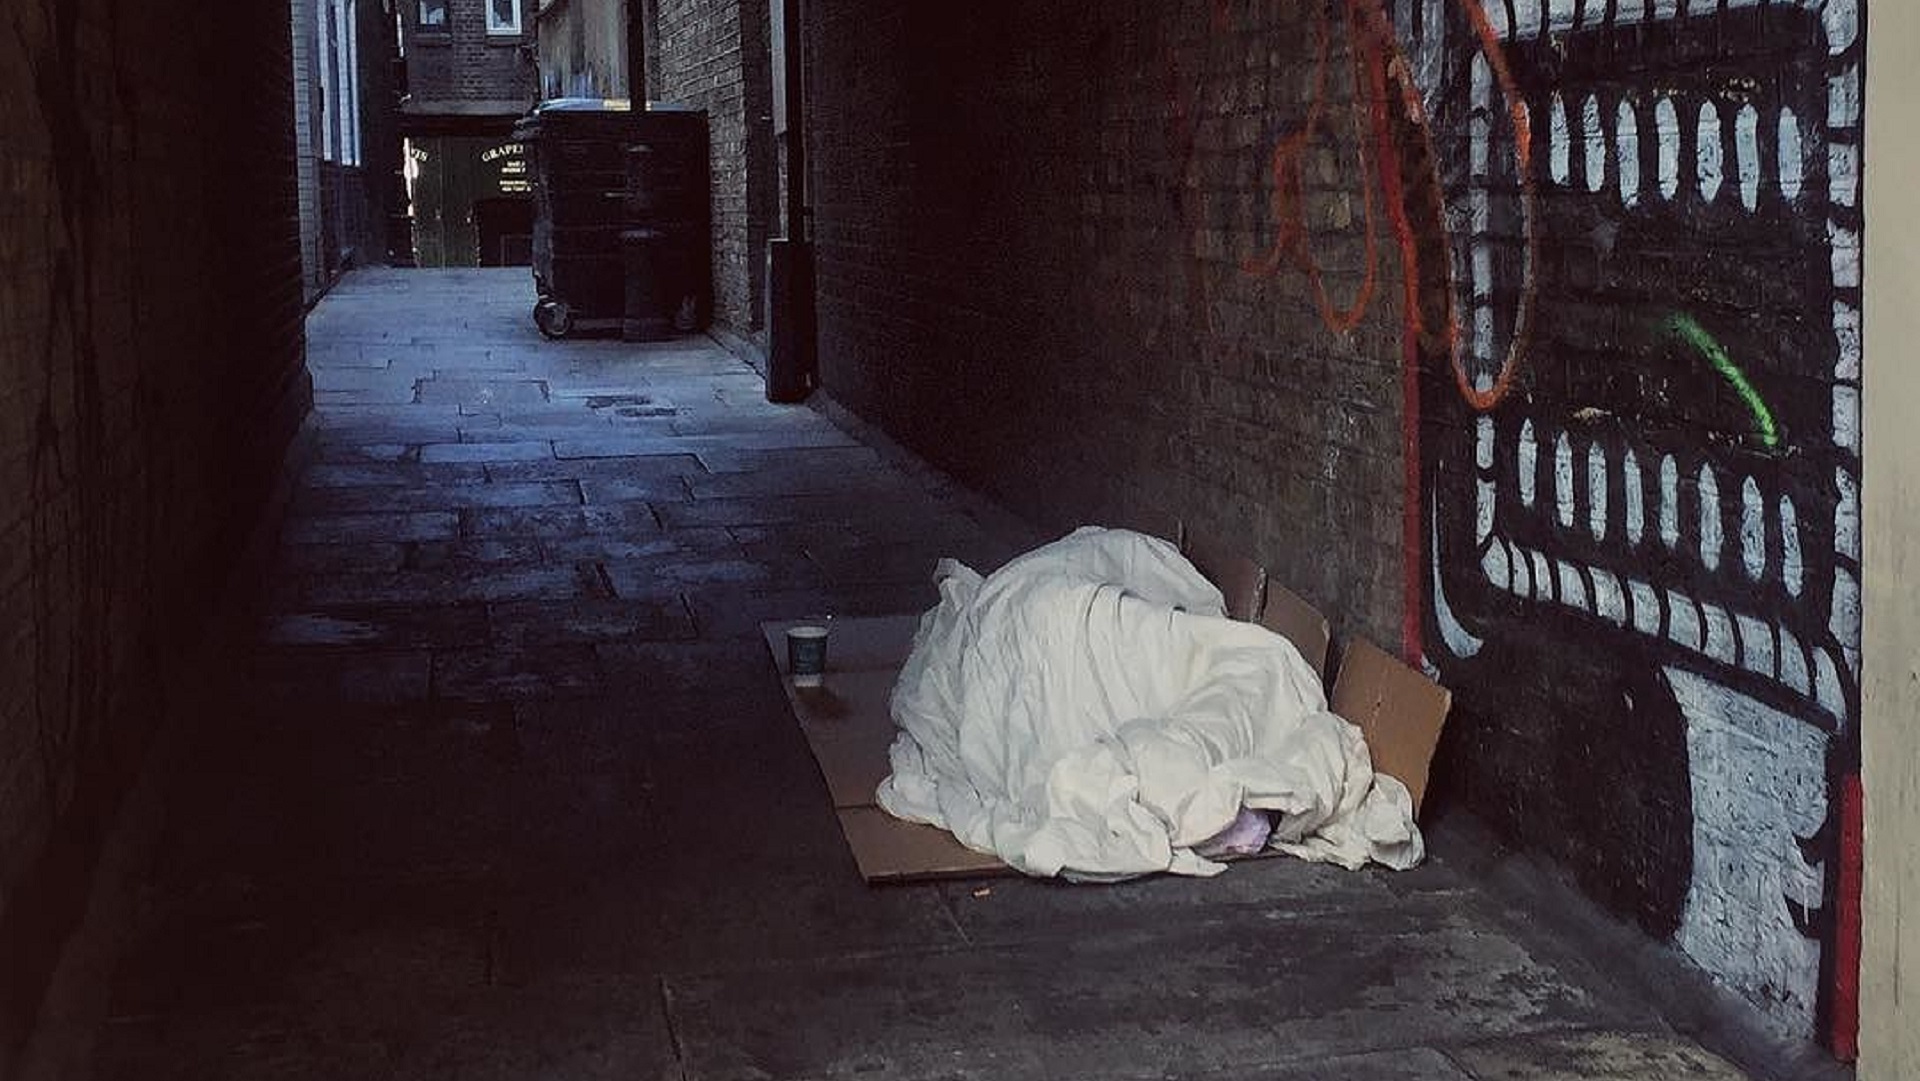 Covid-19 cases are rising among London homeless people